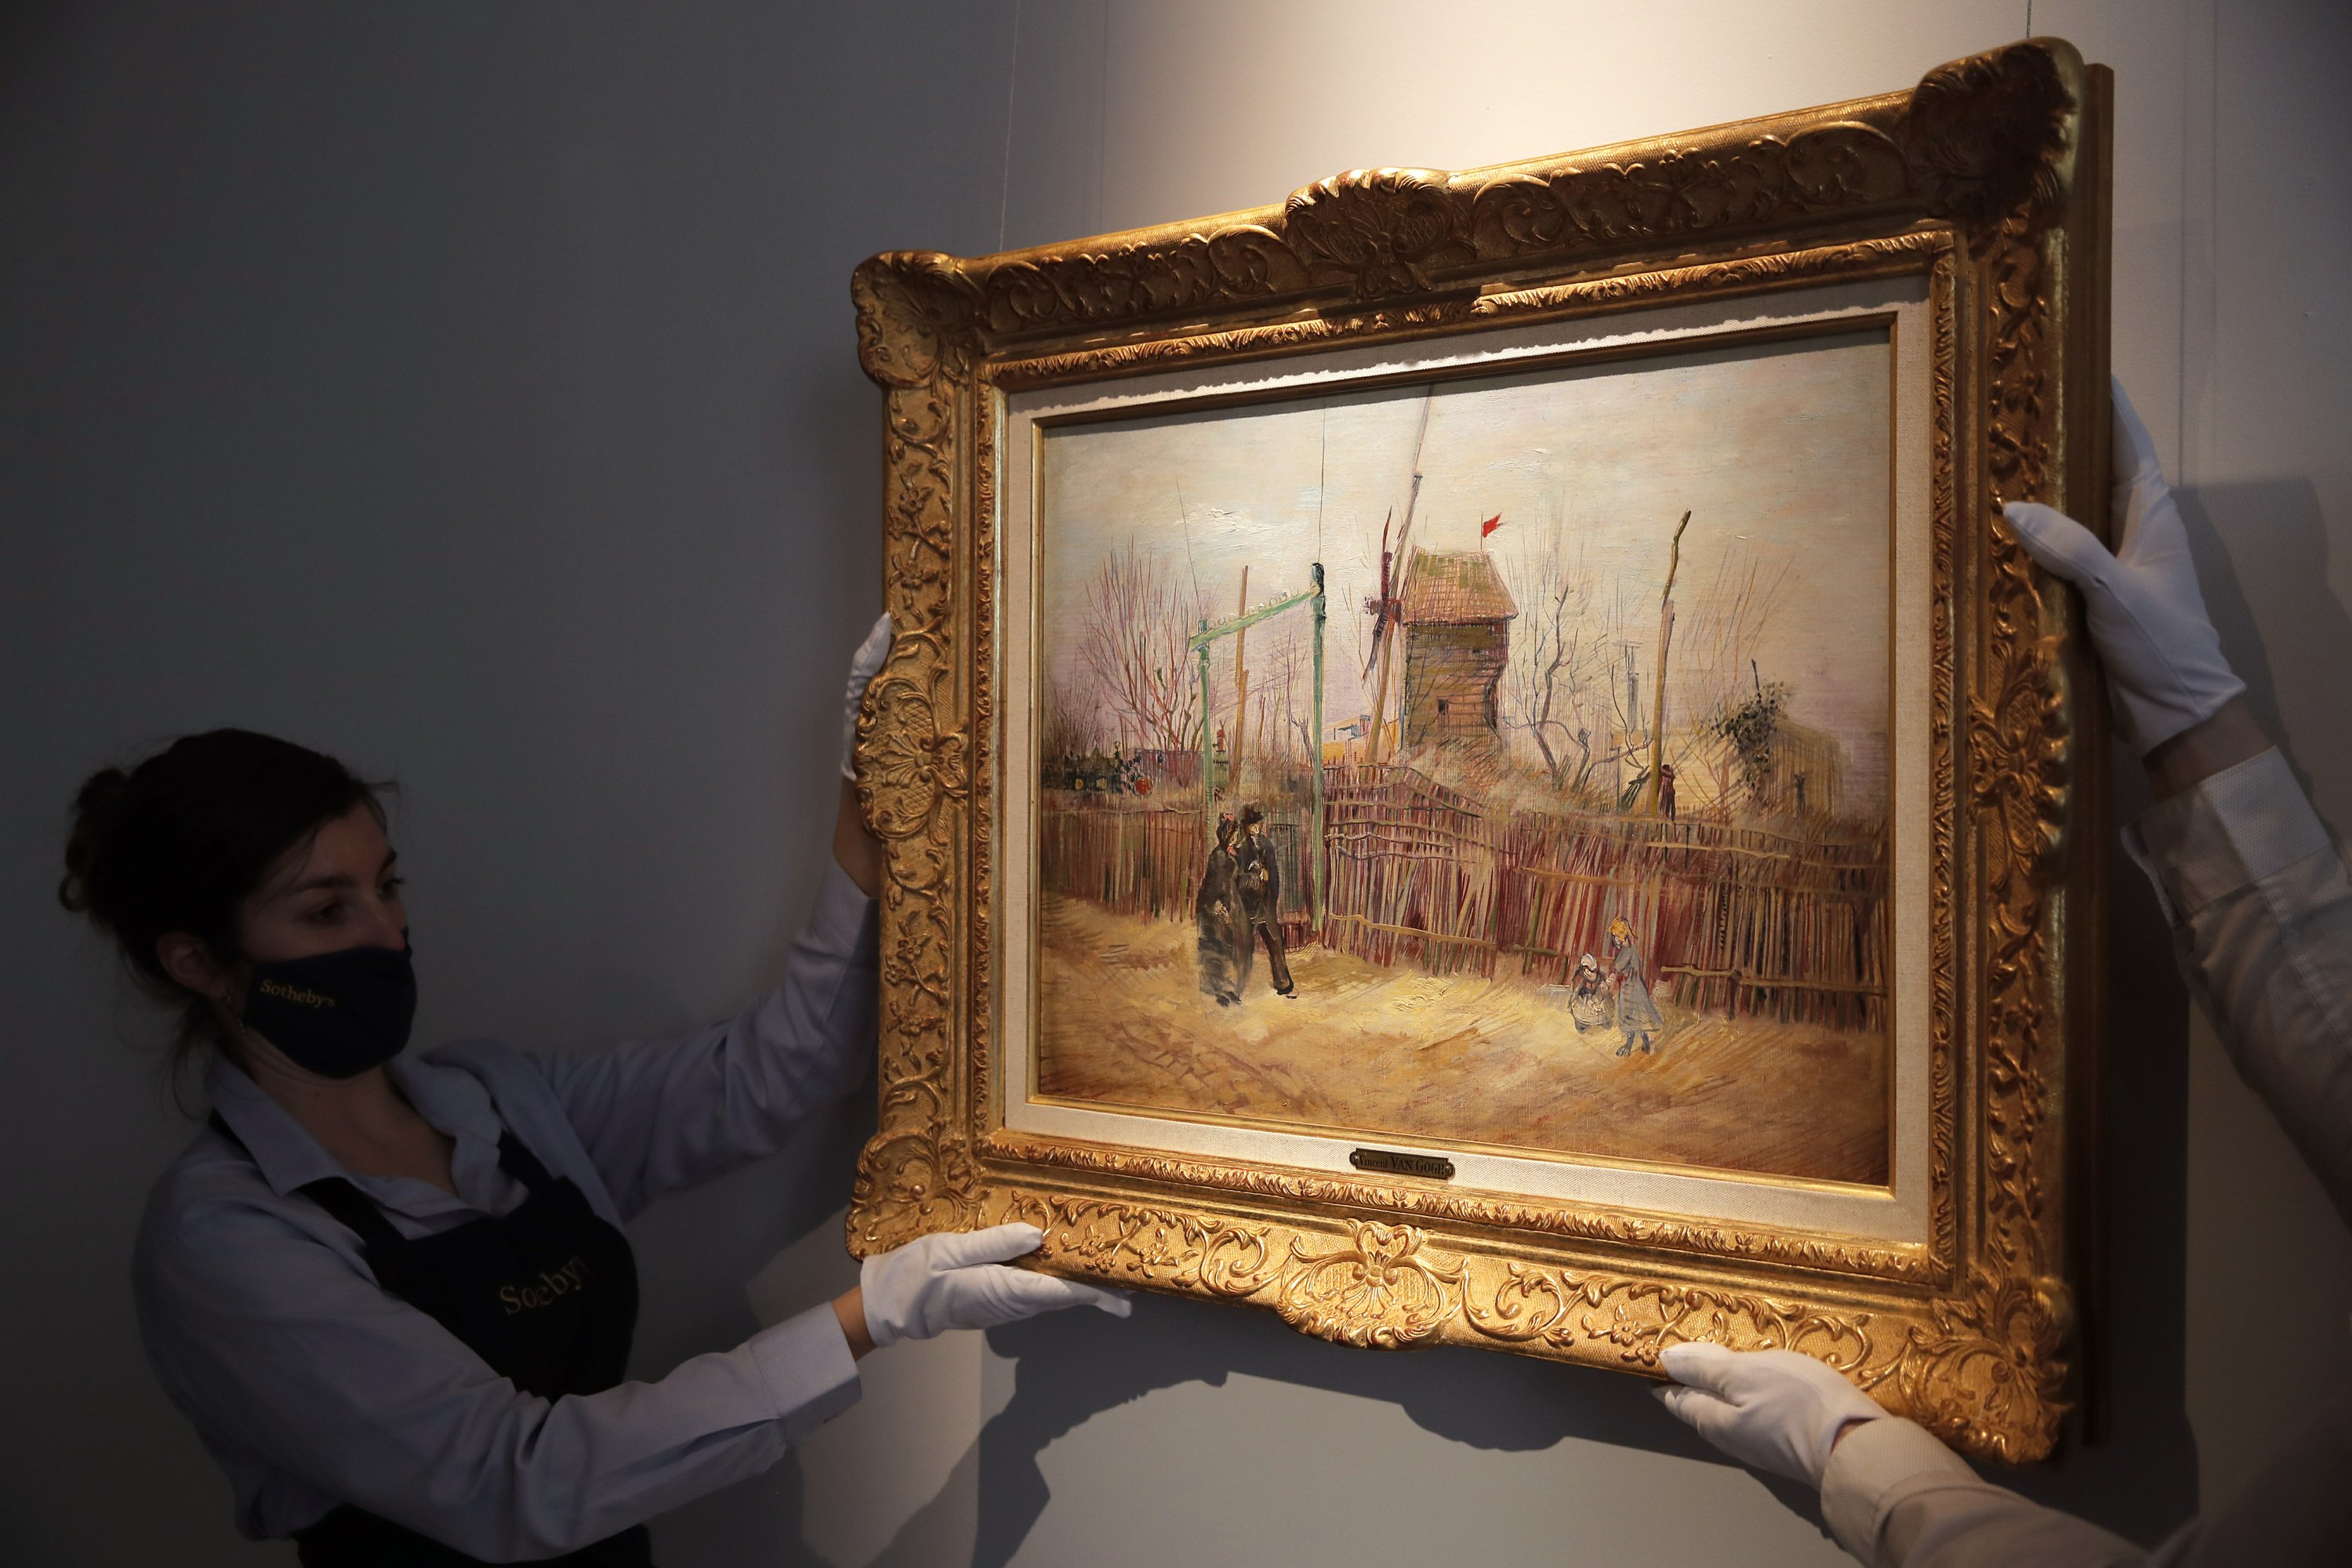 Rarely seen Van Gogh painting displayed before the auction